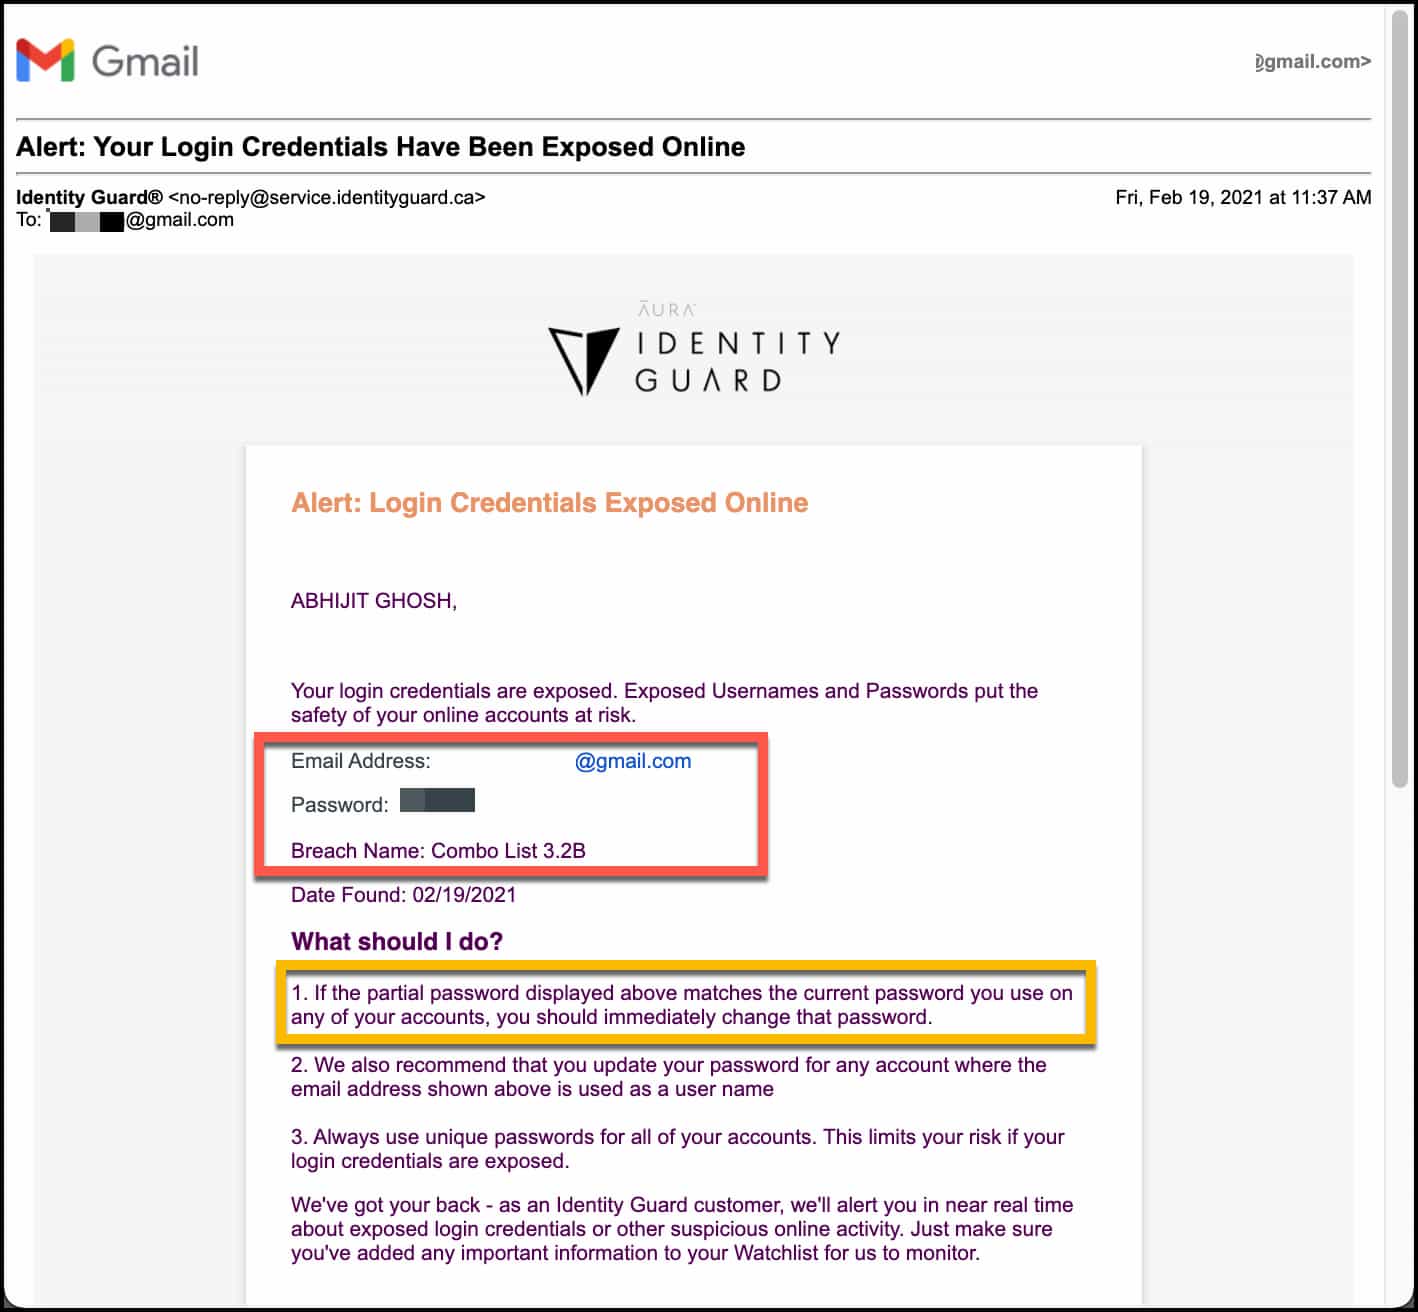 Identity Guard Alert: Your Login Credentials Have Been Exposed Online